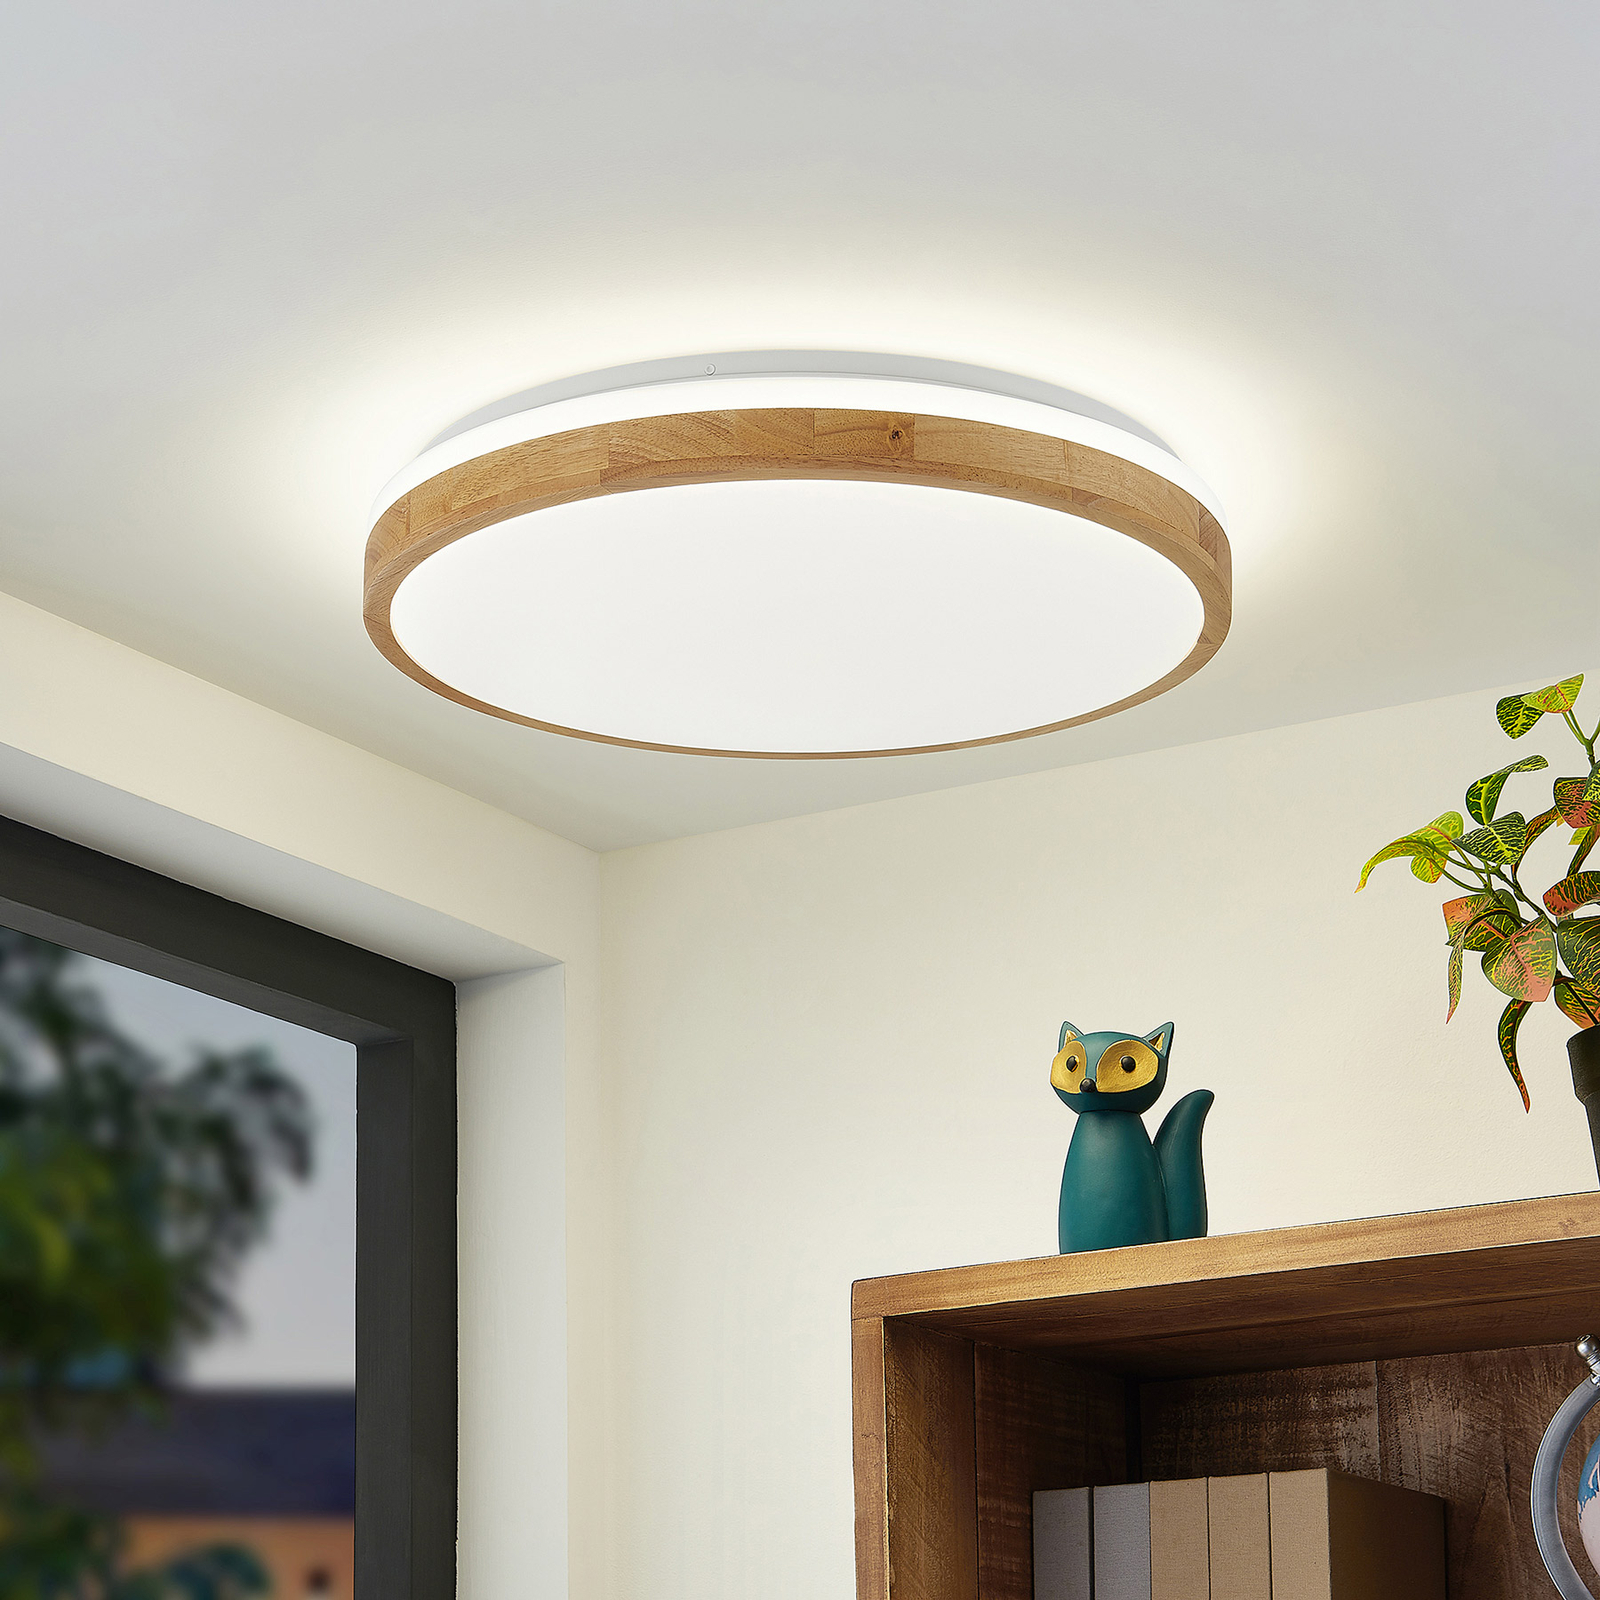 Lindby Emiva ceiling lamp, light strip at the top